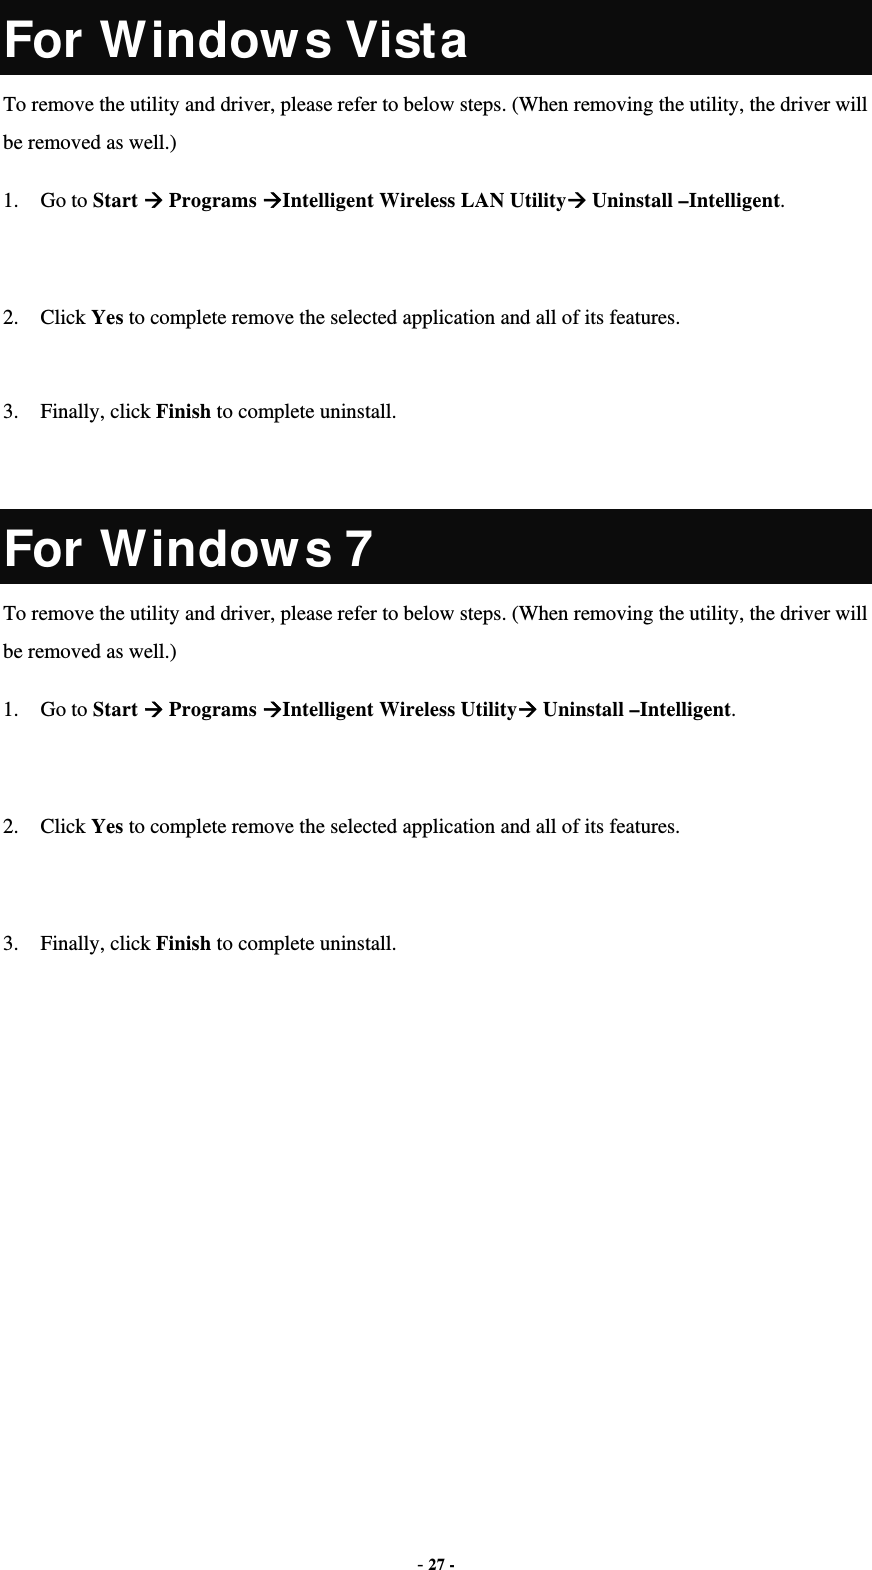  - 27 - For Window s Vista To remove the utility and driver, please refer to below steps. (When removing the utility, the driver will be removed as well.) 1. Go to Start  Programs Intelligent Wireless LAN Utility Uninstall –Intelligent.  2. Click Yes to complete remove the selected application and all of its features.  3. Finally, click Finish to complete uninstall.  For Window s 7 To remove the utility and driver, please refer to below steps. (When removing the utility, the driver will be removed as well.) 1. Go to Start  Programs Intelligent Wireless Utility Uninstall –Intelligent.  2. Click Yes to complete remove the selected application and all of its features.  3. Finally, click Finish to complete uninstall. 